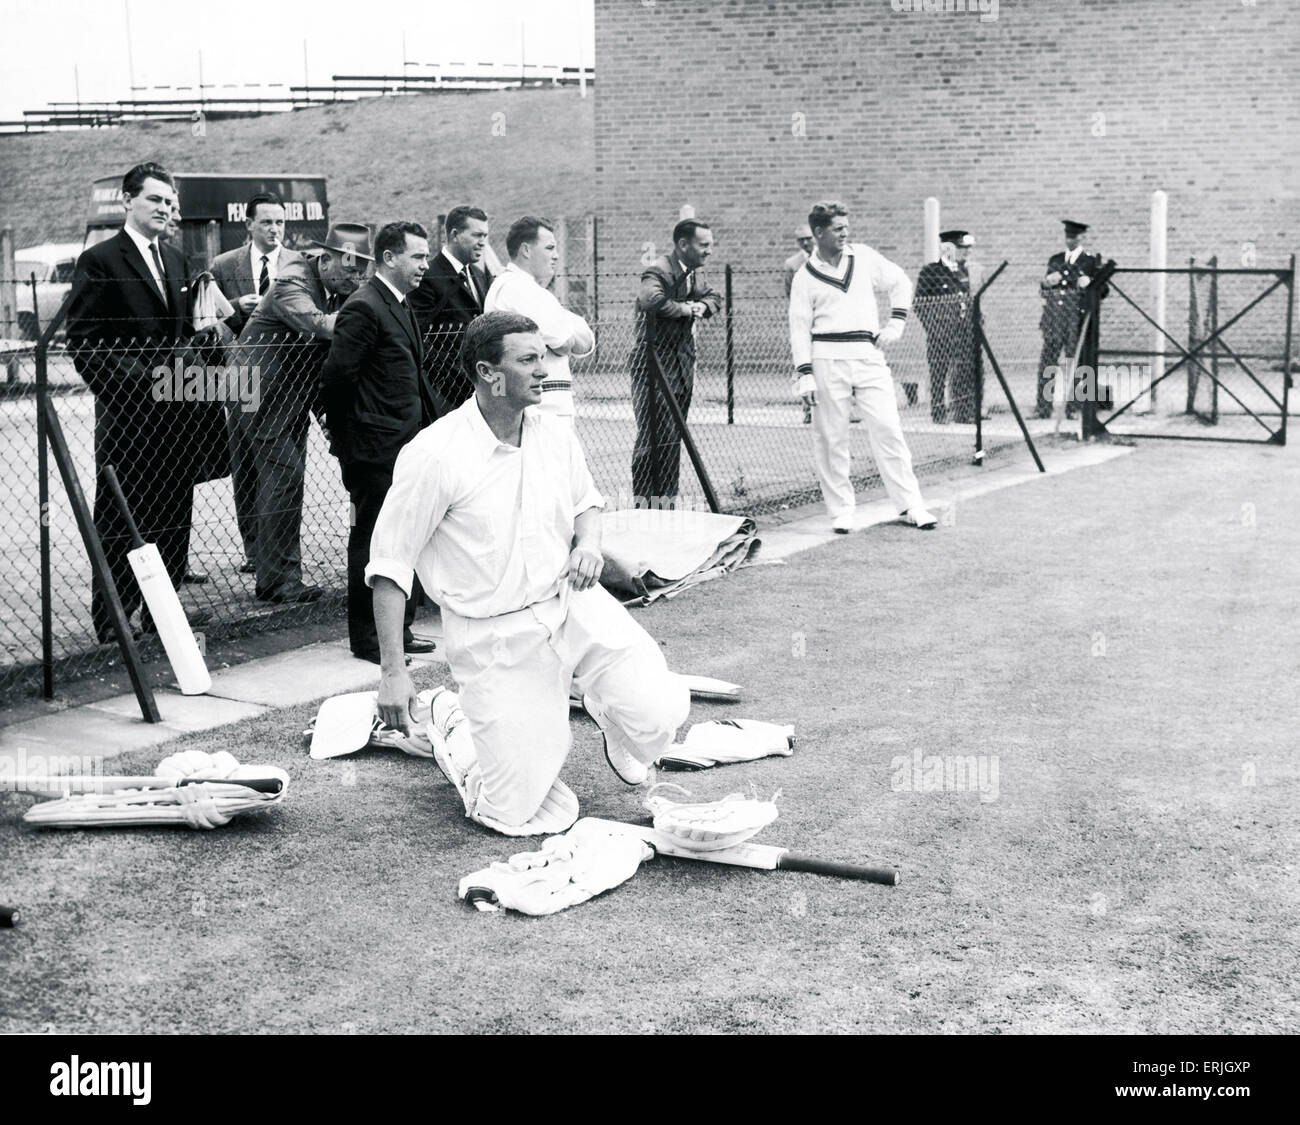 Australian cricket tour of England for the Ashes. England v Australia First Test match at Edgbaston. Australian captain Richie Benaud in the nets.  10th June 1961. Stock Photo